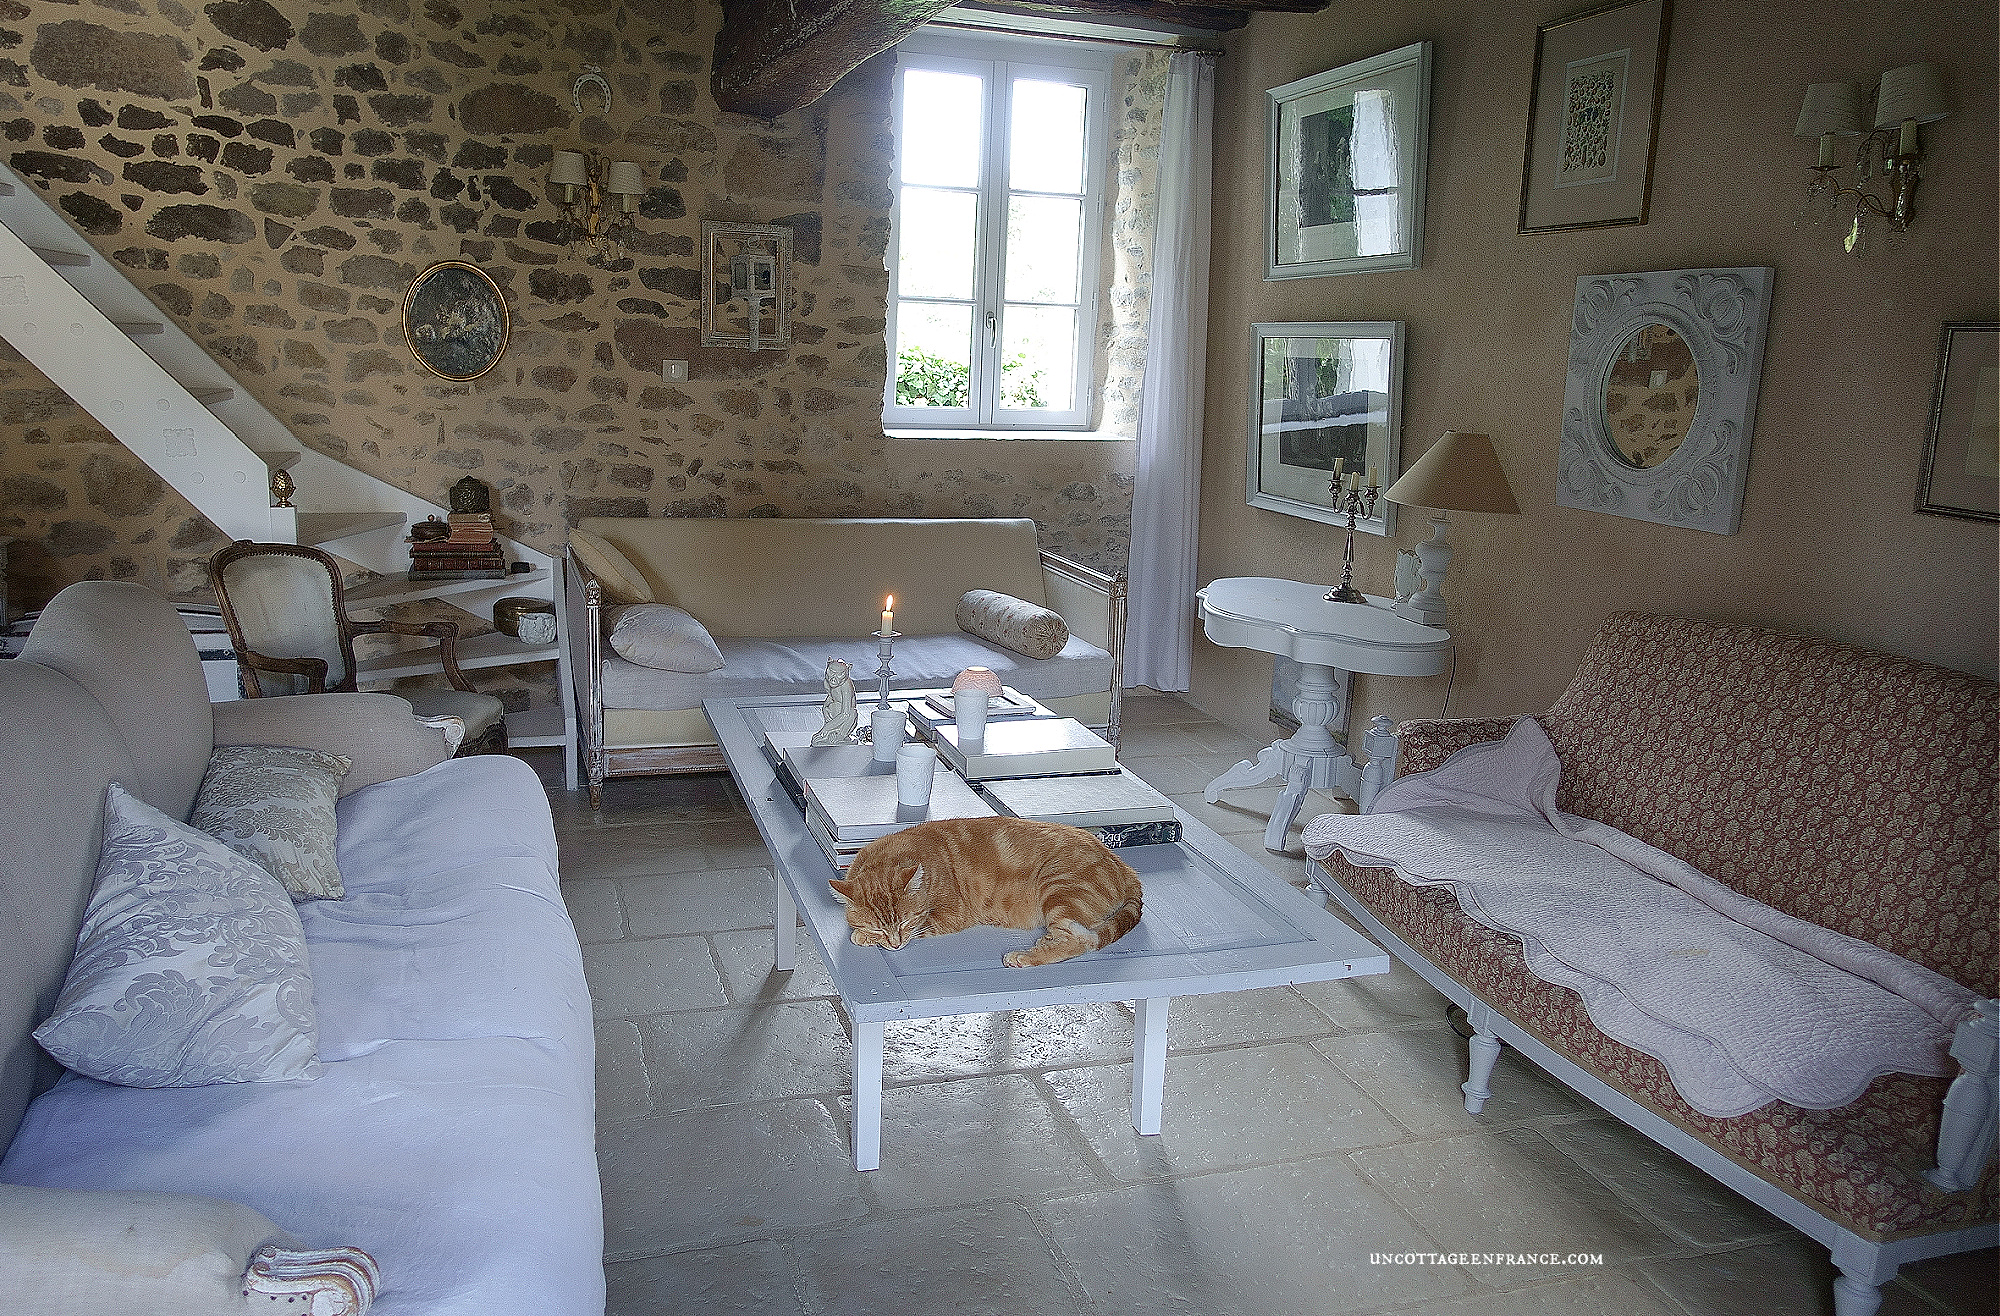 #whitecottagecharm #uncottageenfrance #campagnechic #frenchinterior #frenchfarmhousestyle #frenchcountry #frenchliving #fixerupperstyle #frenchcountrycottage #allthingsfrench #frenchcottage #farmhousevignette #cottagevignette #chippypaint #frenchdecoration #fermette #countrychic #rustique #rusticdecor #decorustic #cottagedecor #maisondecampagne #campagnedecoration #countryhomemag #brocante #monochromehome #greycottage #frenchgrey #gristendre #grischic #storebouillonné